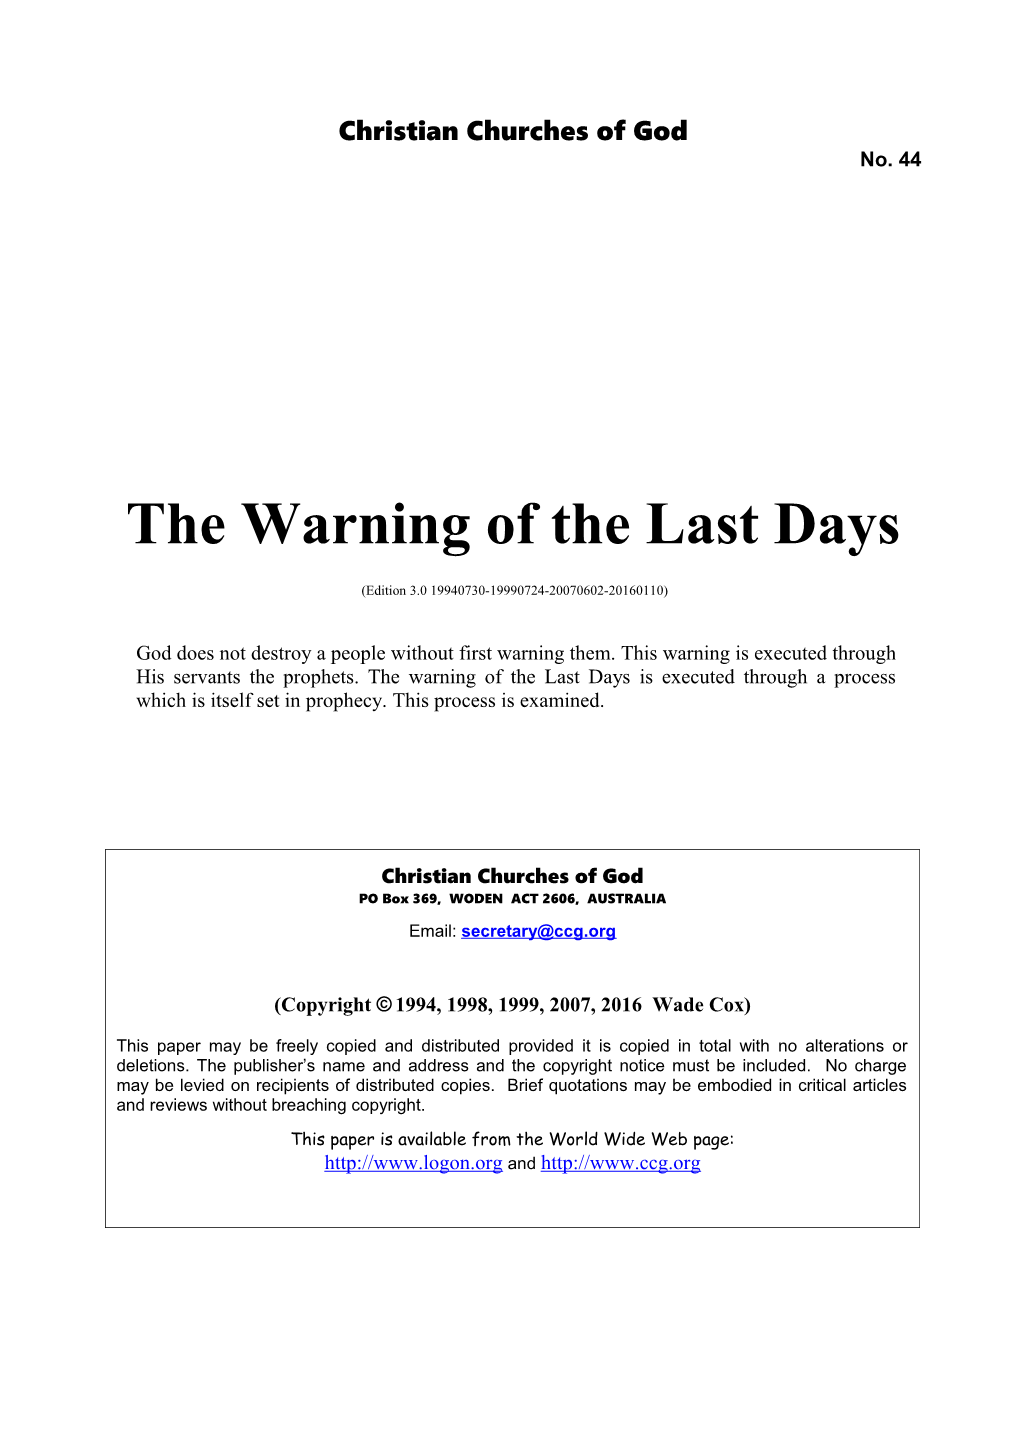 The Warning of the Last Days (No. 44)